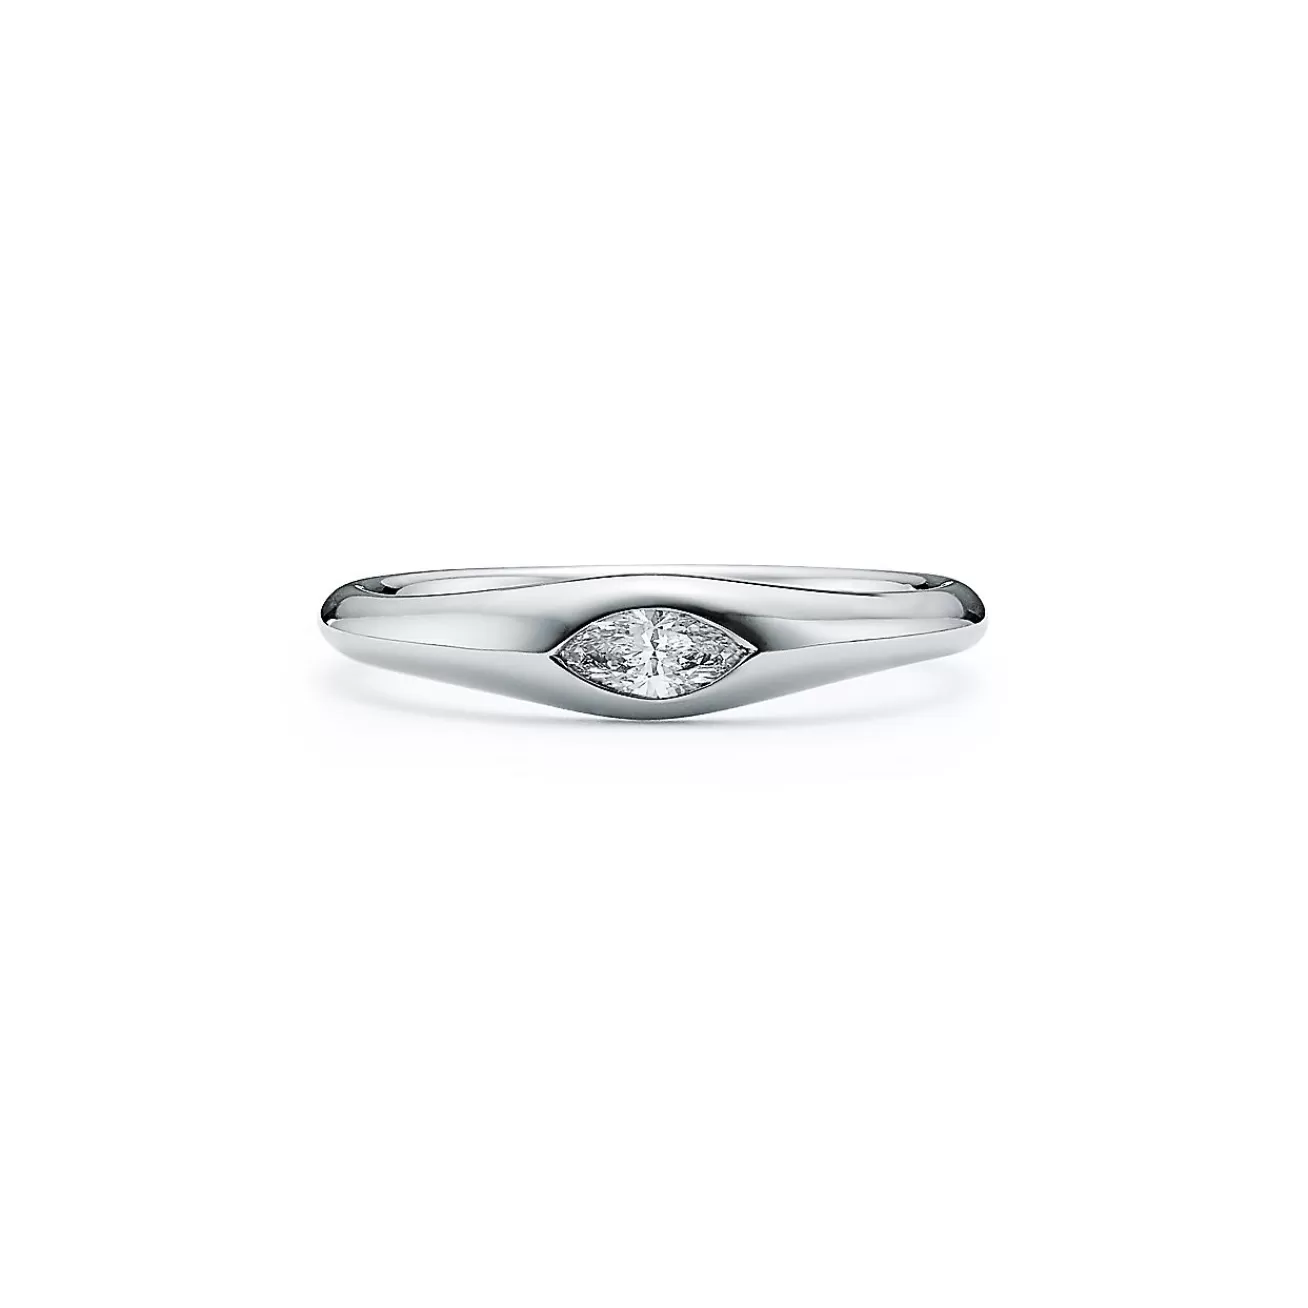 Tiffany & Co. Elsa Peretti® marquise band ring in platinum with a diamond. | ^ Rings | Platinum Jewelry